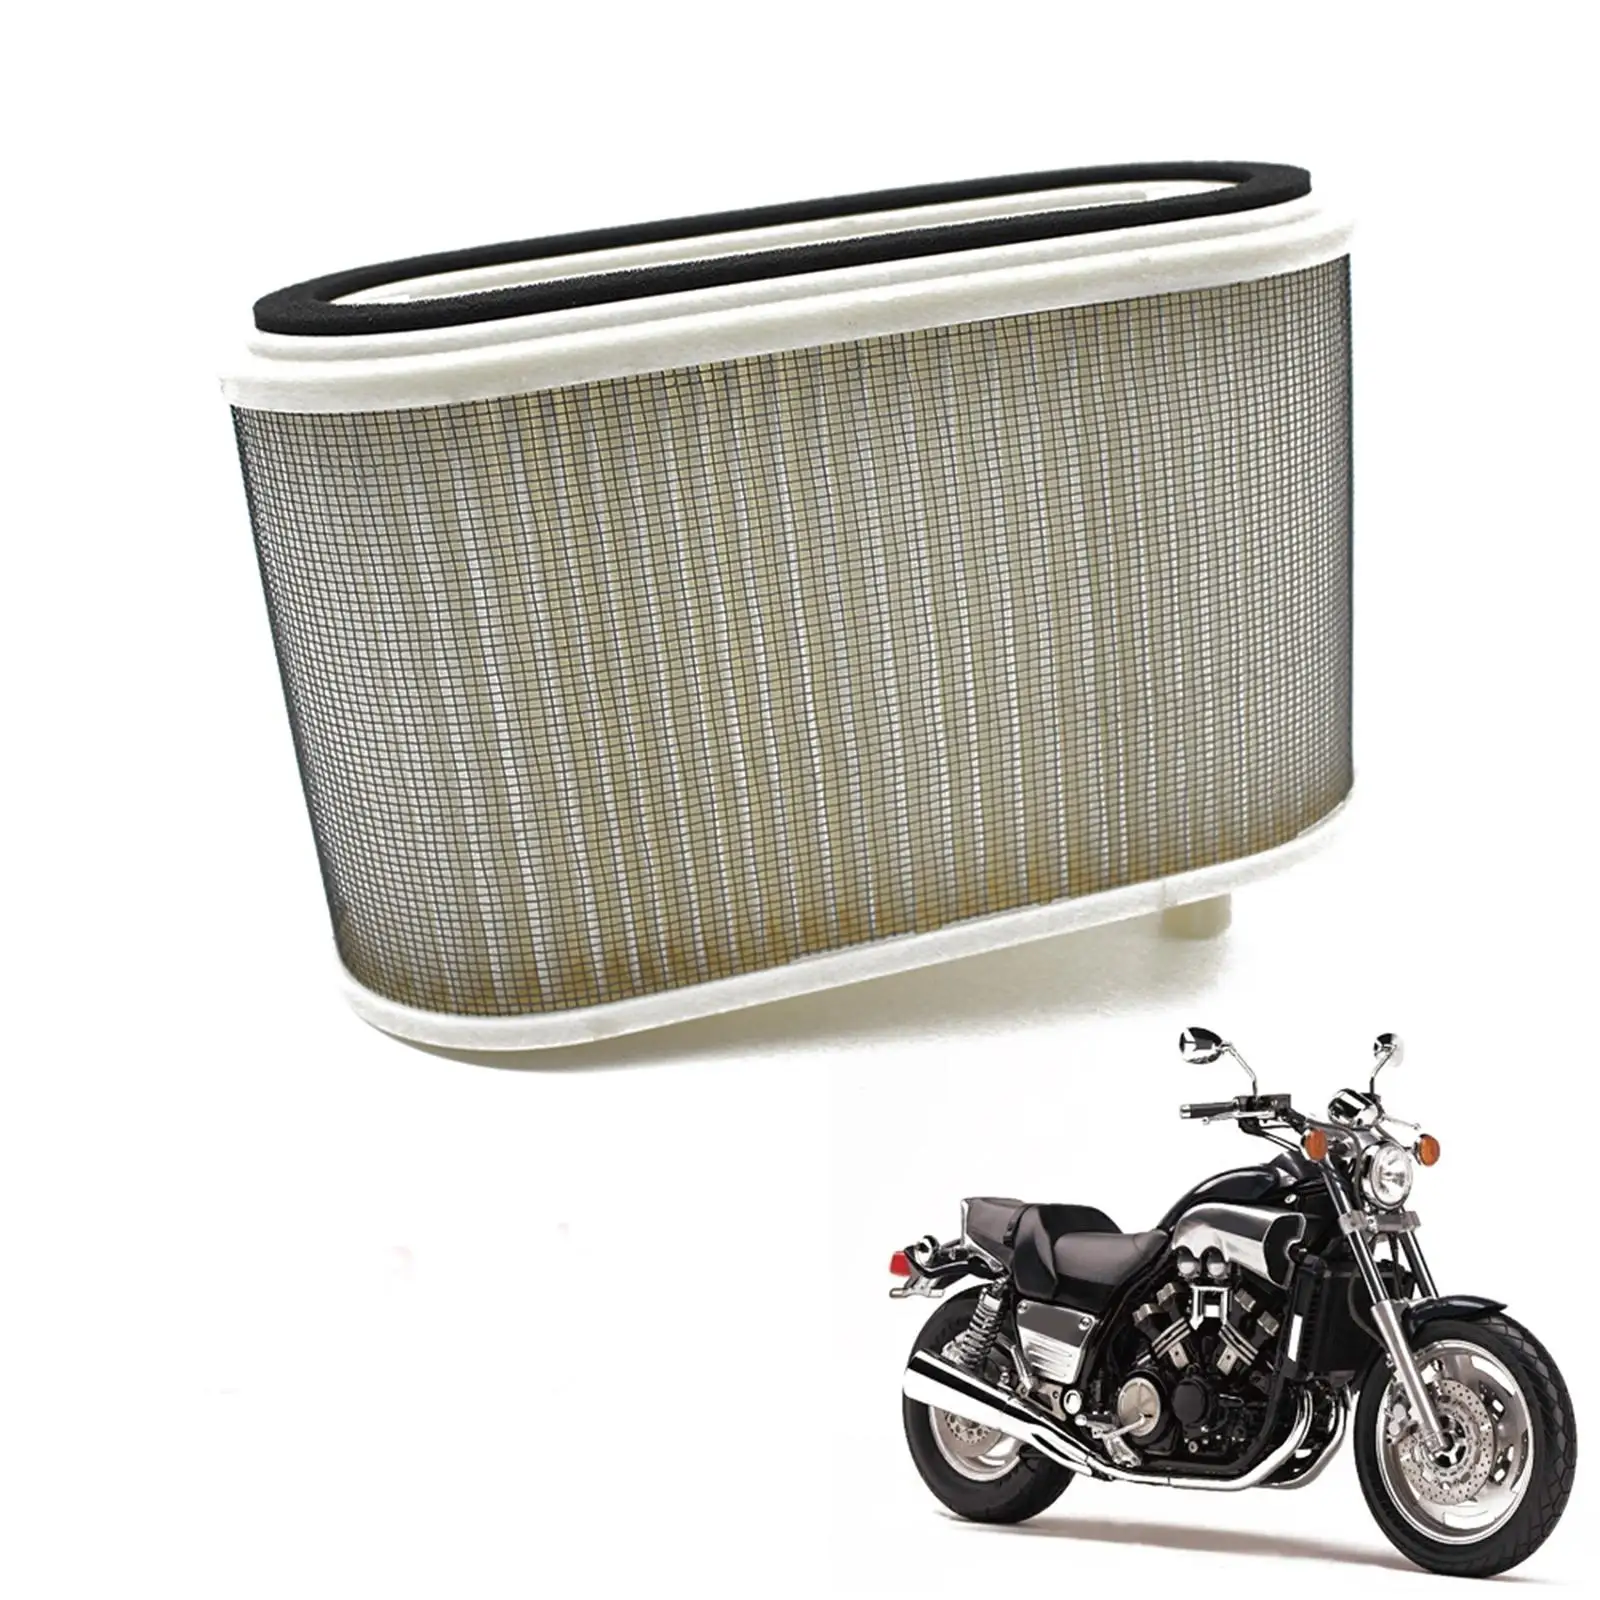 Air Filter Spare Parts Replaces Accessories Hfa4910 for Yamaha Vmx1200 85-95